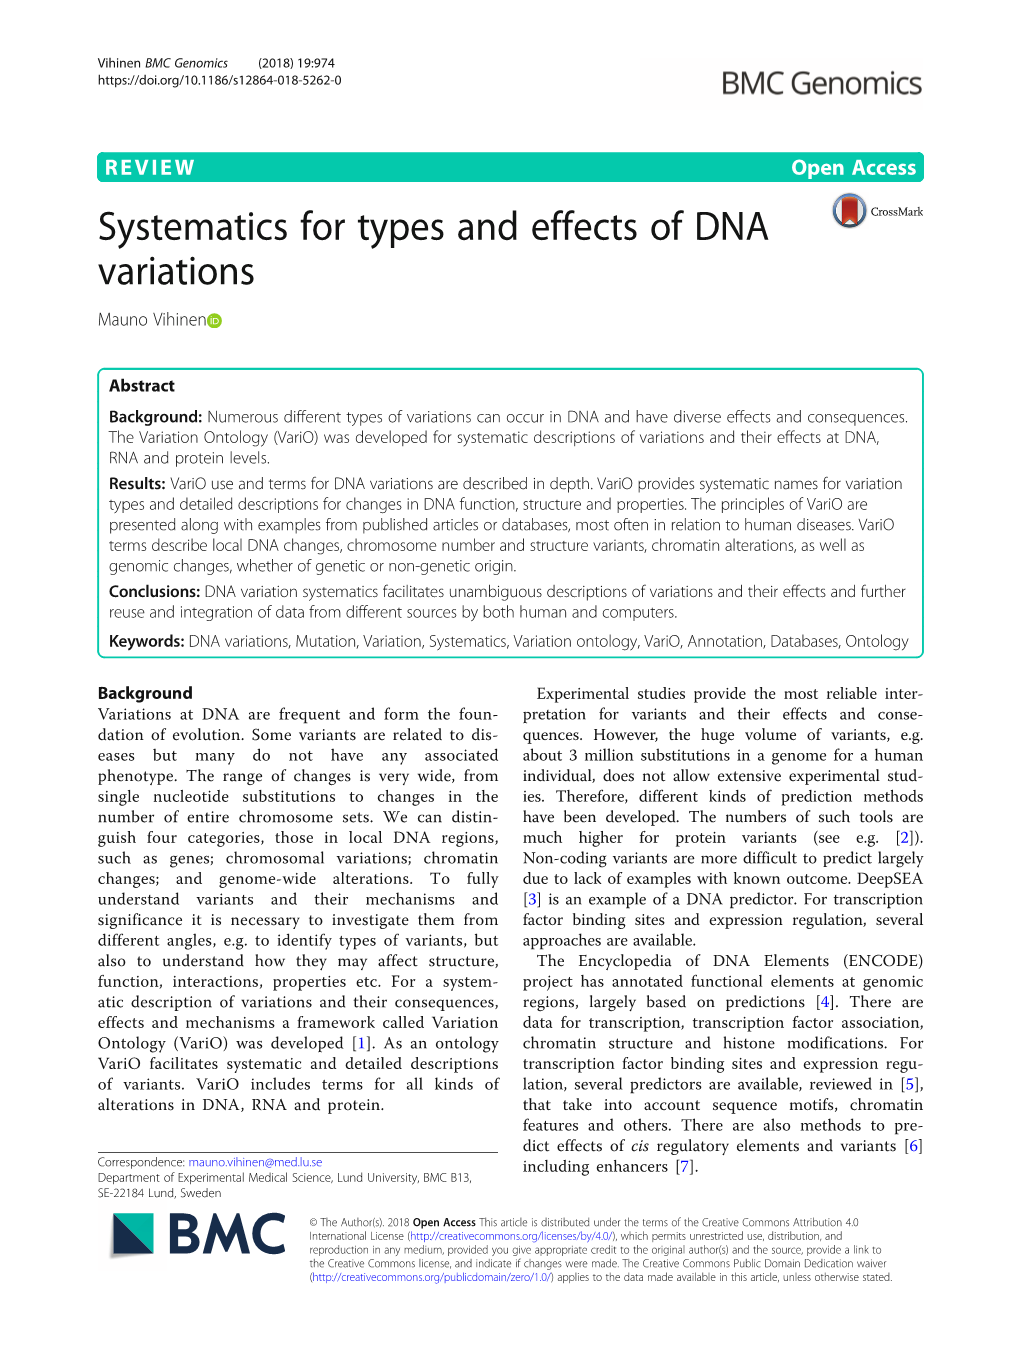 Systematics for Types and Effects of DNA Variations Mauno Vihinen